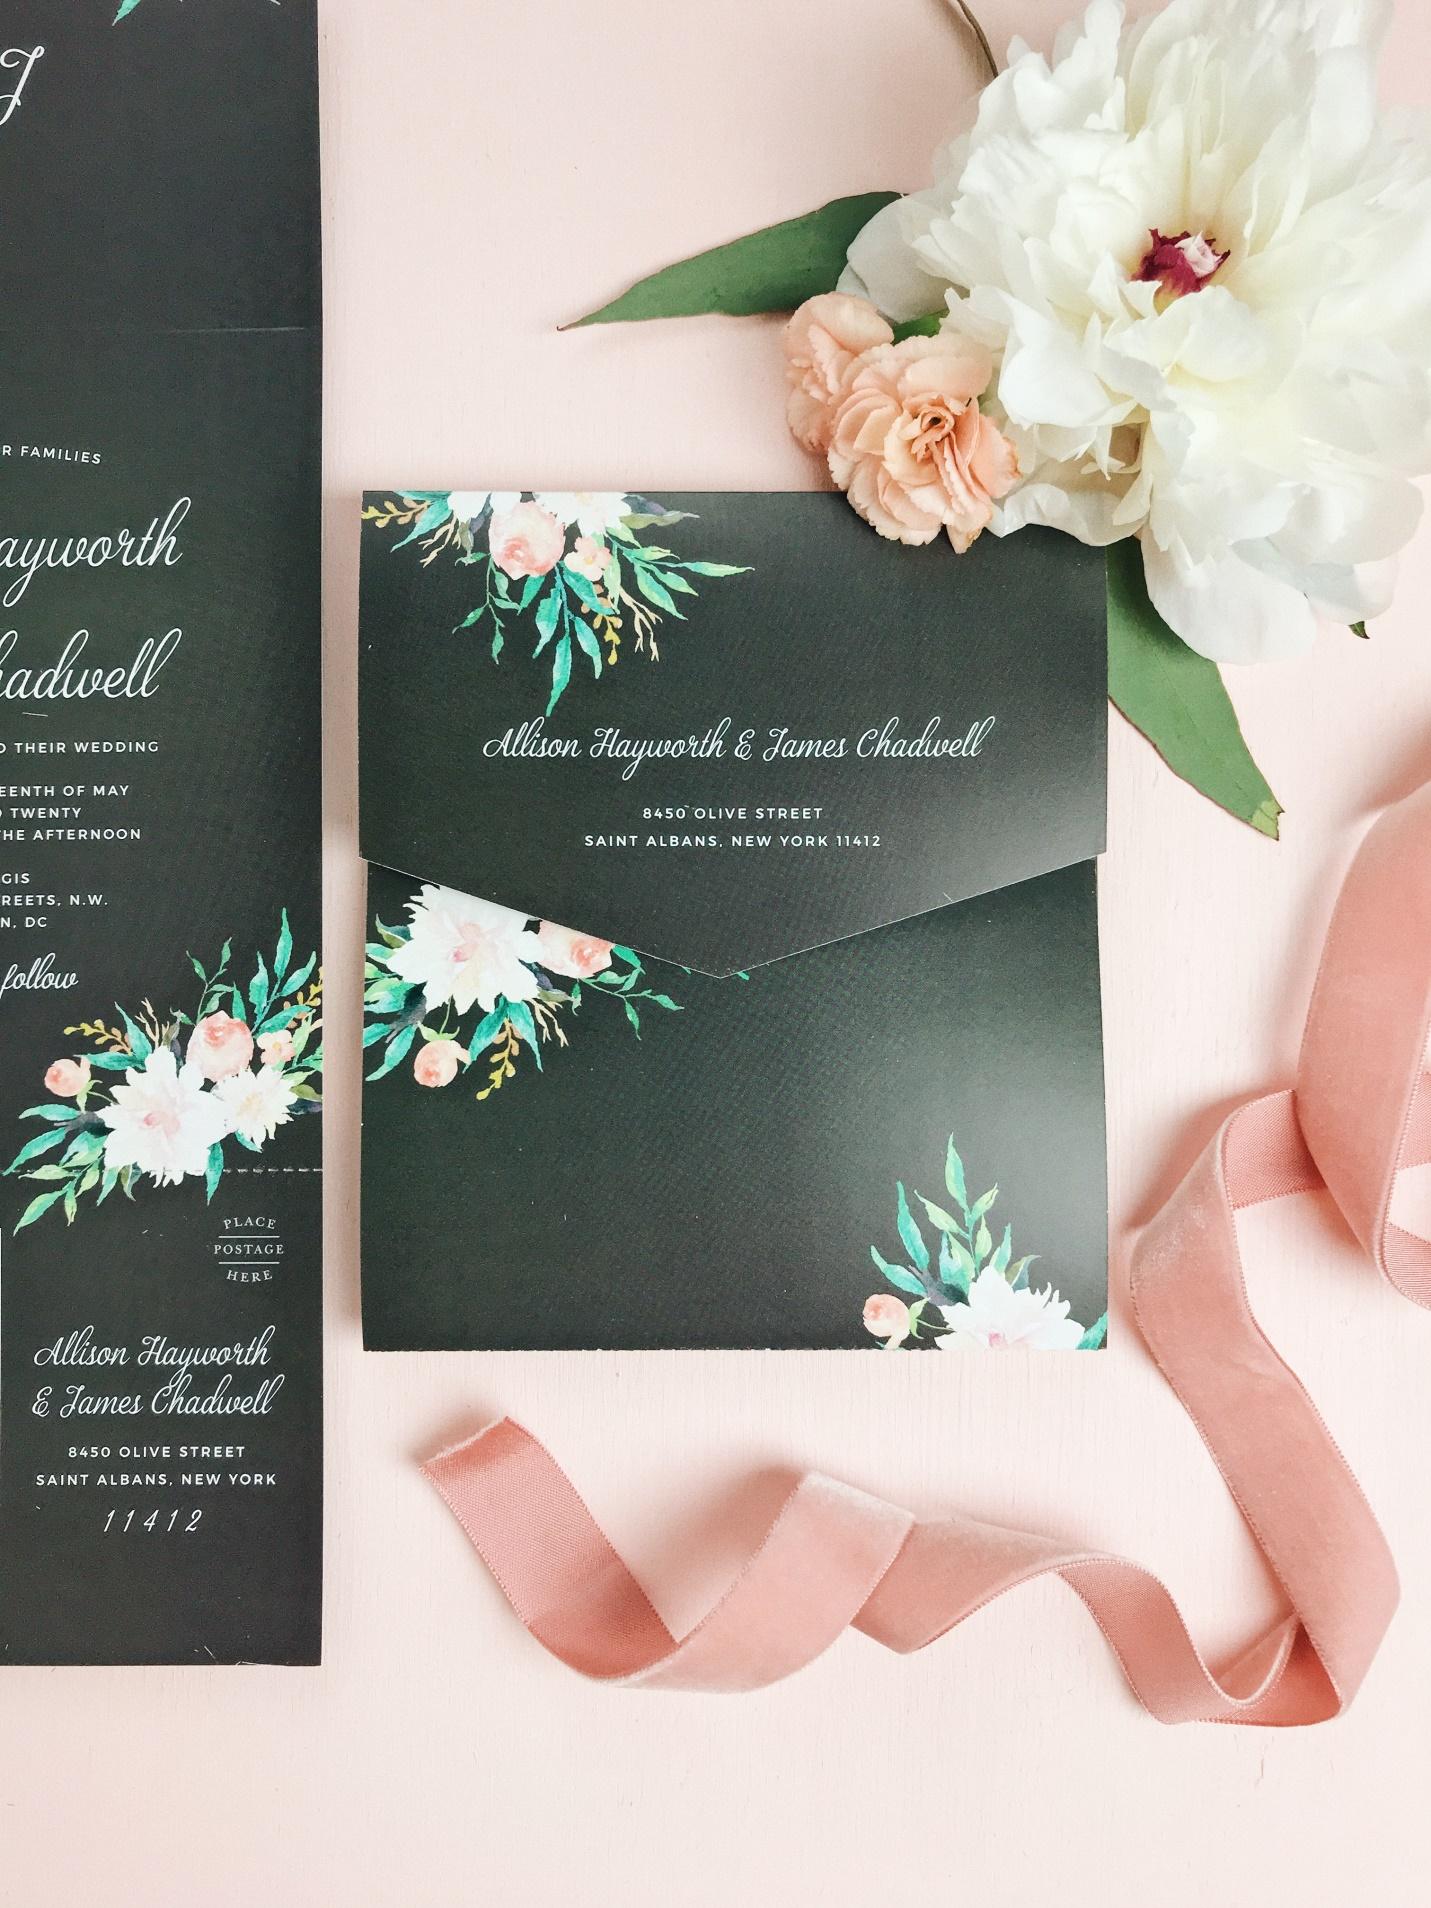 How To Give Wedding Invitations As a Gift To An Engaged Couple